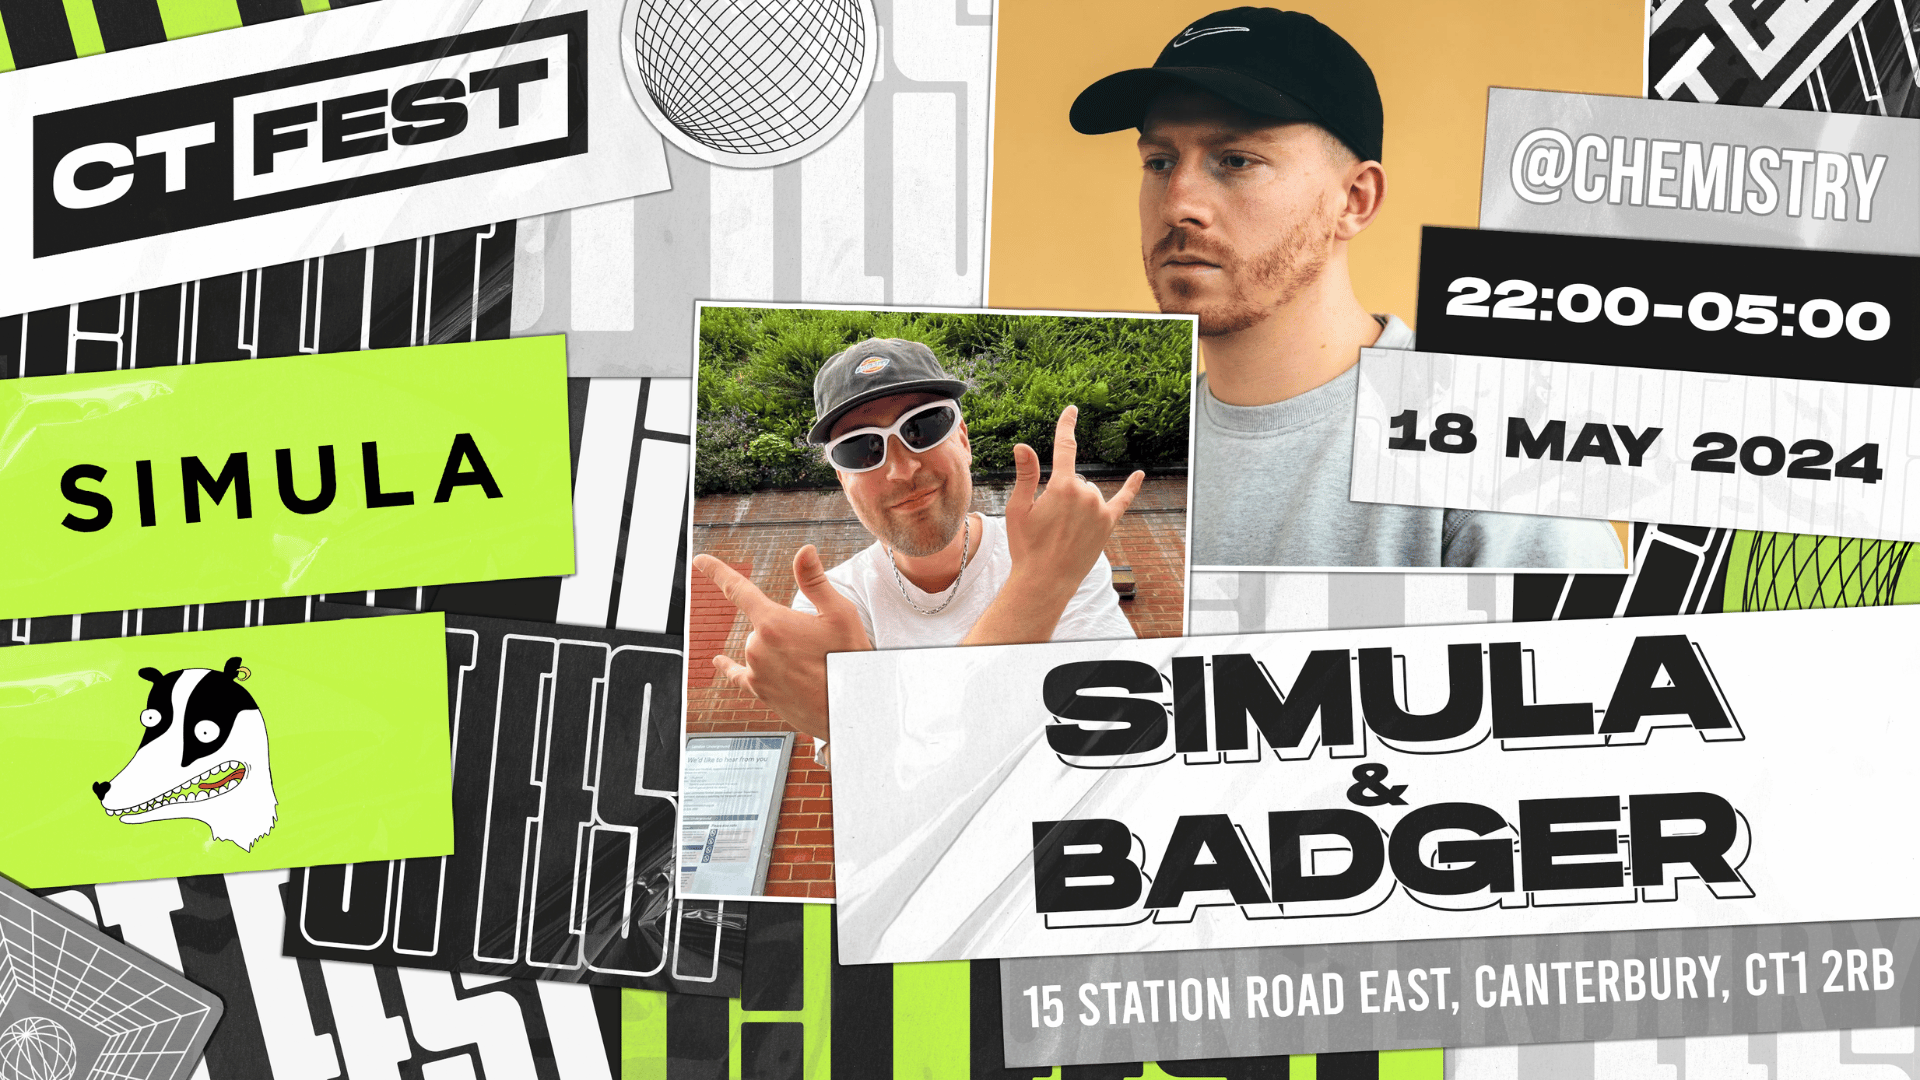 CT Fest ∙ SIMULA & BADGER *ONLY 7 £6 TICKETS LEFT*